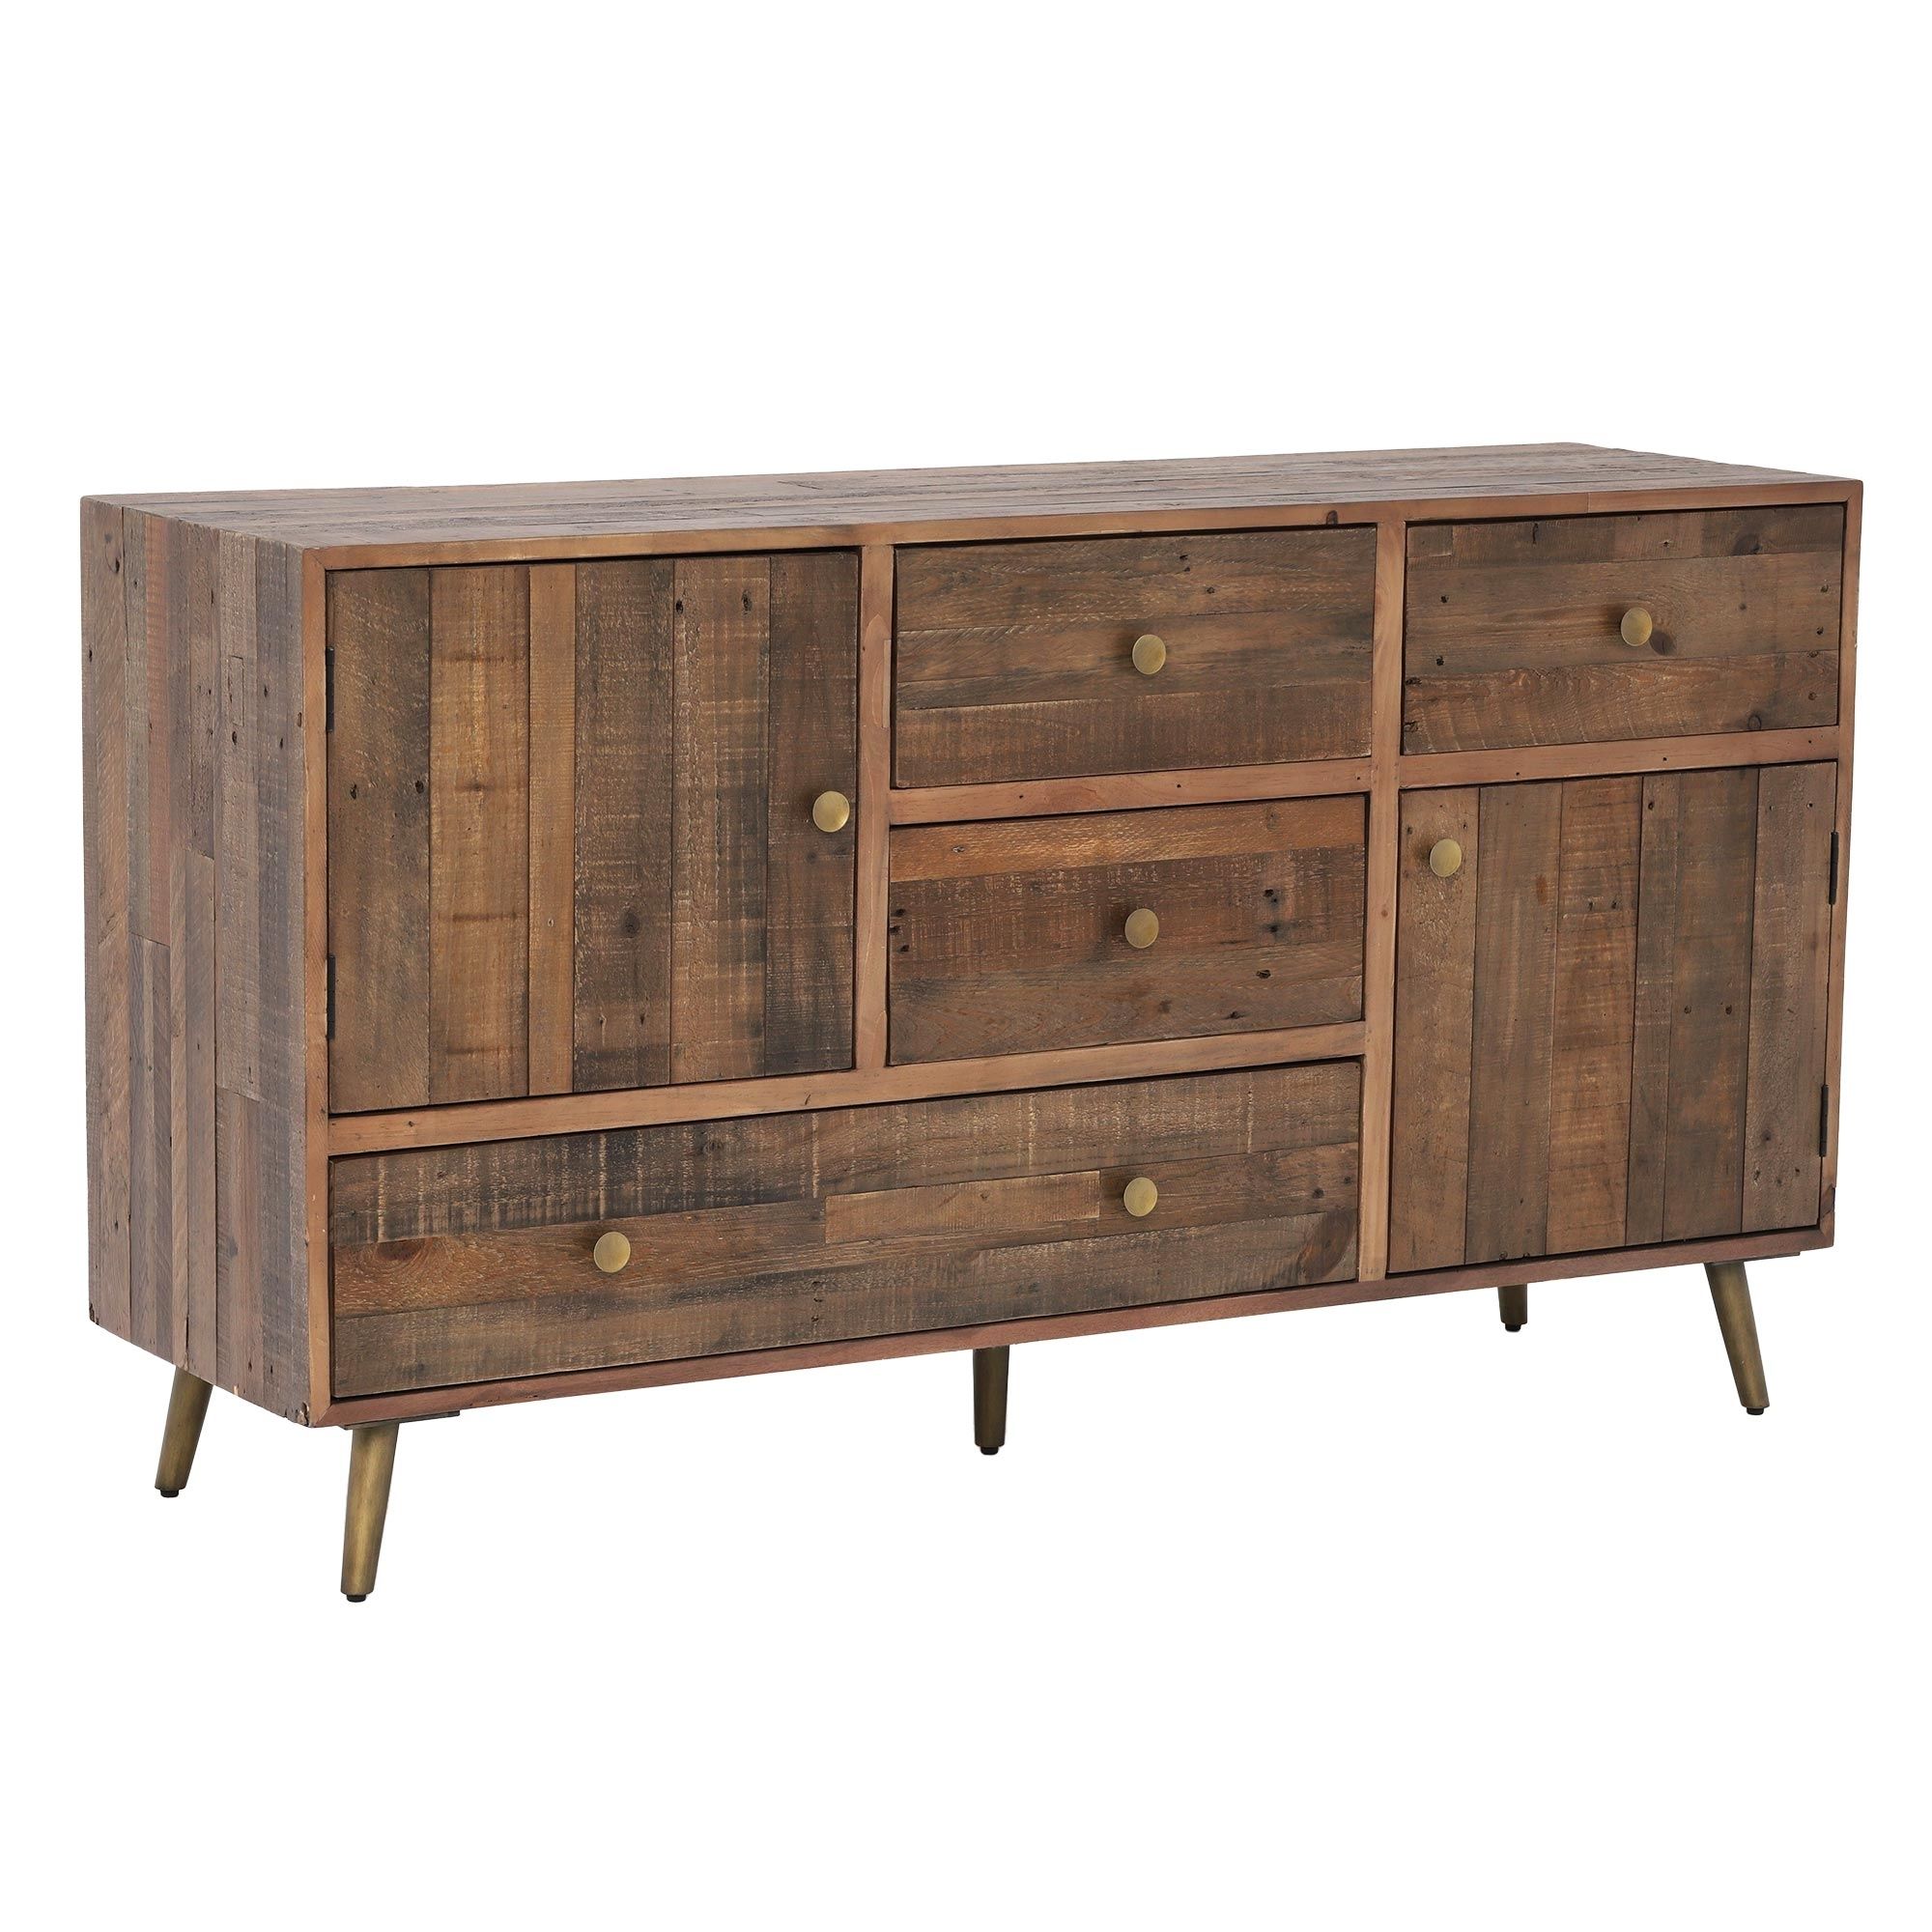 Modi 4 Drawer 2 Door Sideboard | Sideboards | Dining Room In Most Recently Released Open Shelf Brass 4 Drawer Sideboards (View 6 of 20)